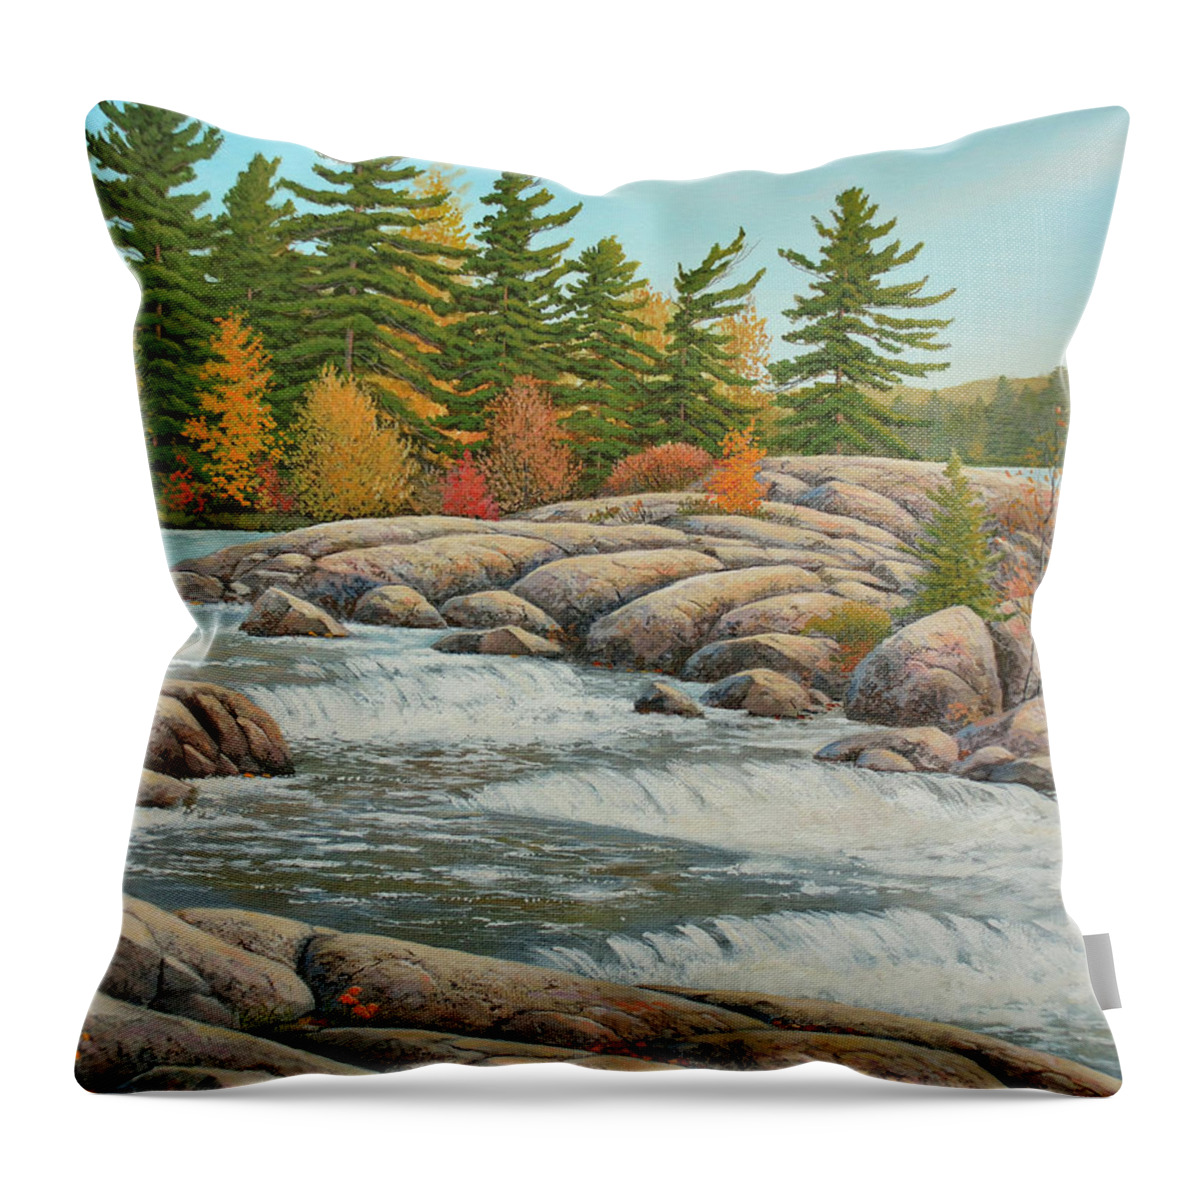 Jake Vandenbrink Throw Pillow featuring the painting Cascading Flow by Jake Vandenbrink